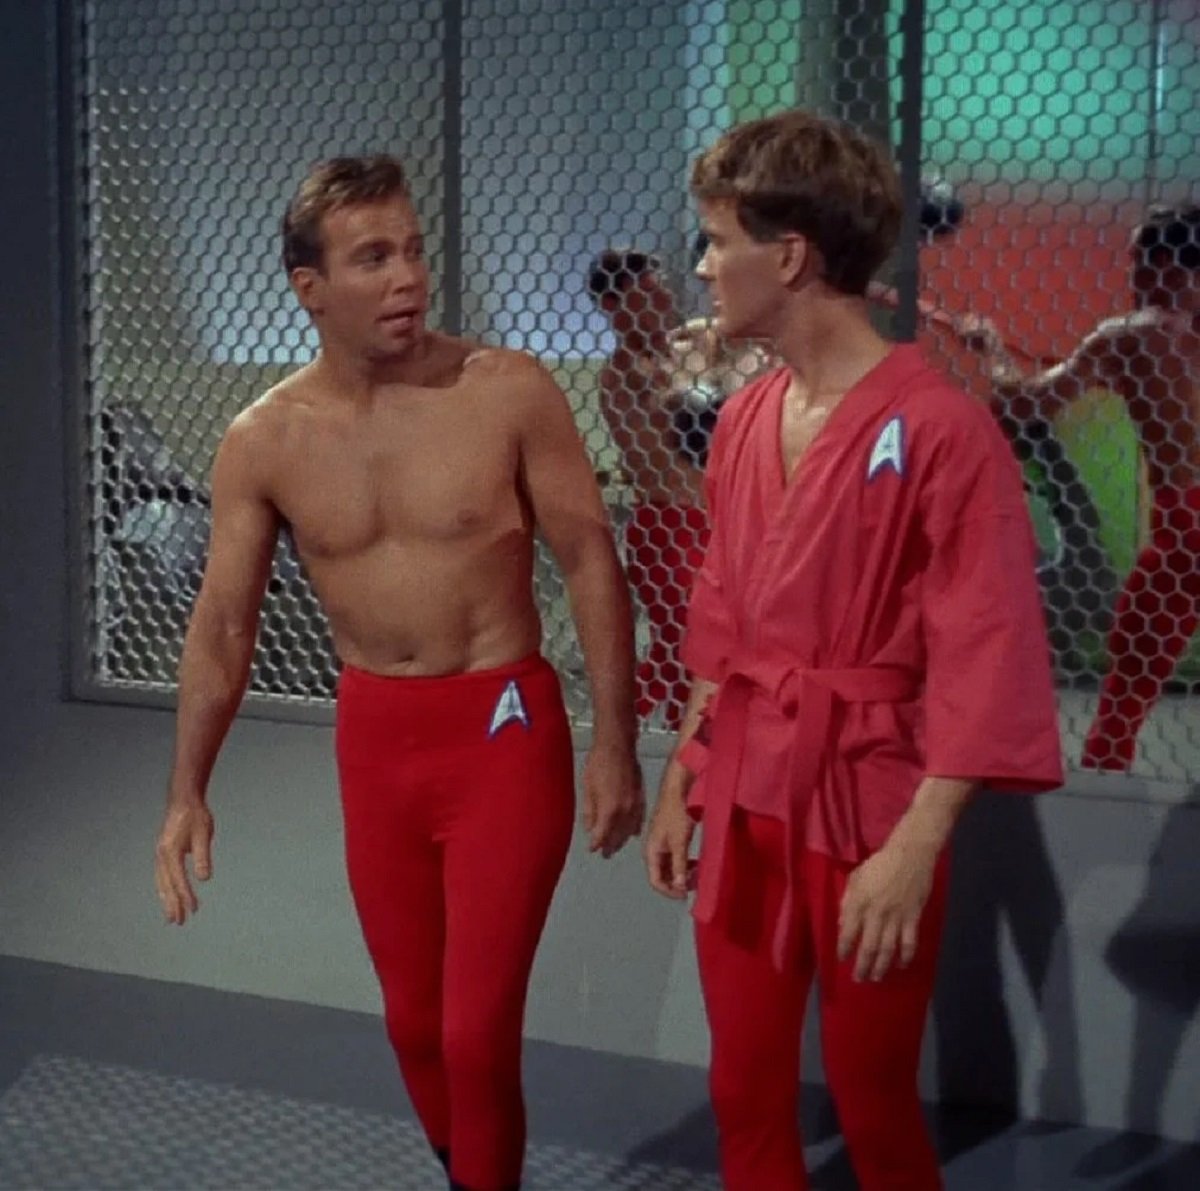 William Shatner as Captain Kirk in a scene from 'Star Trek.' Kirk (white man with short brown hair) is shirtless and wearing tight, red leggings with a Starfleet insignia over one hip. He's standing next to another white man in a red, Starfleet gi with an insignia on the shoulder and the same red leggings. 